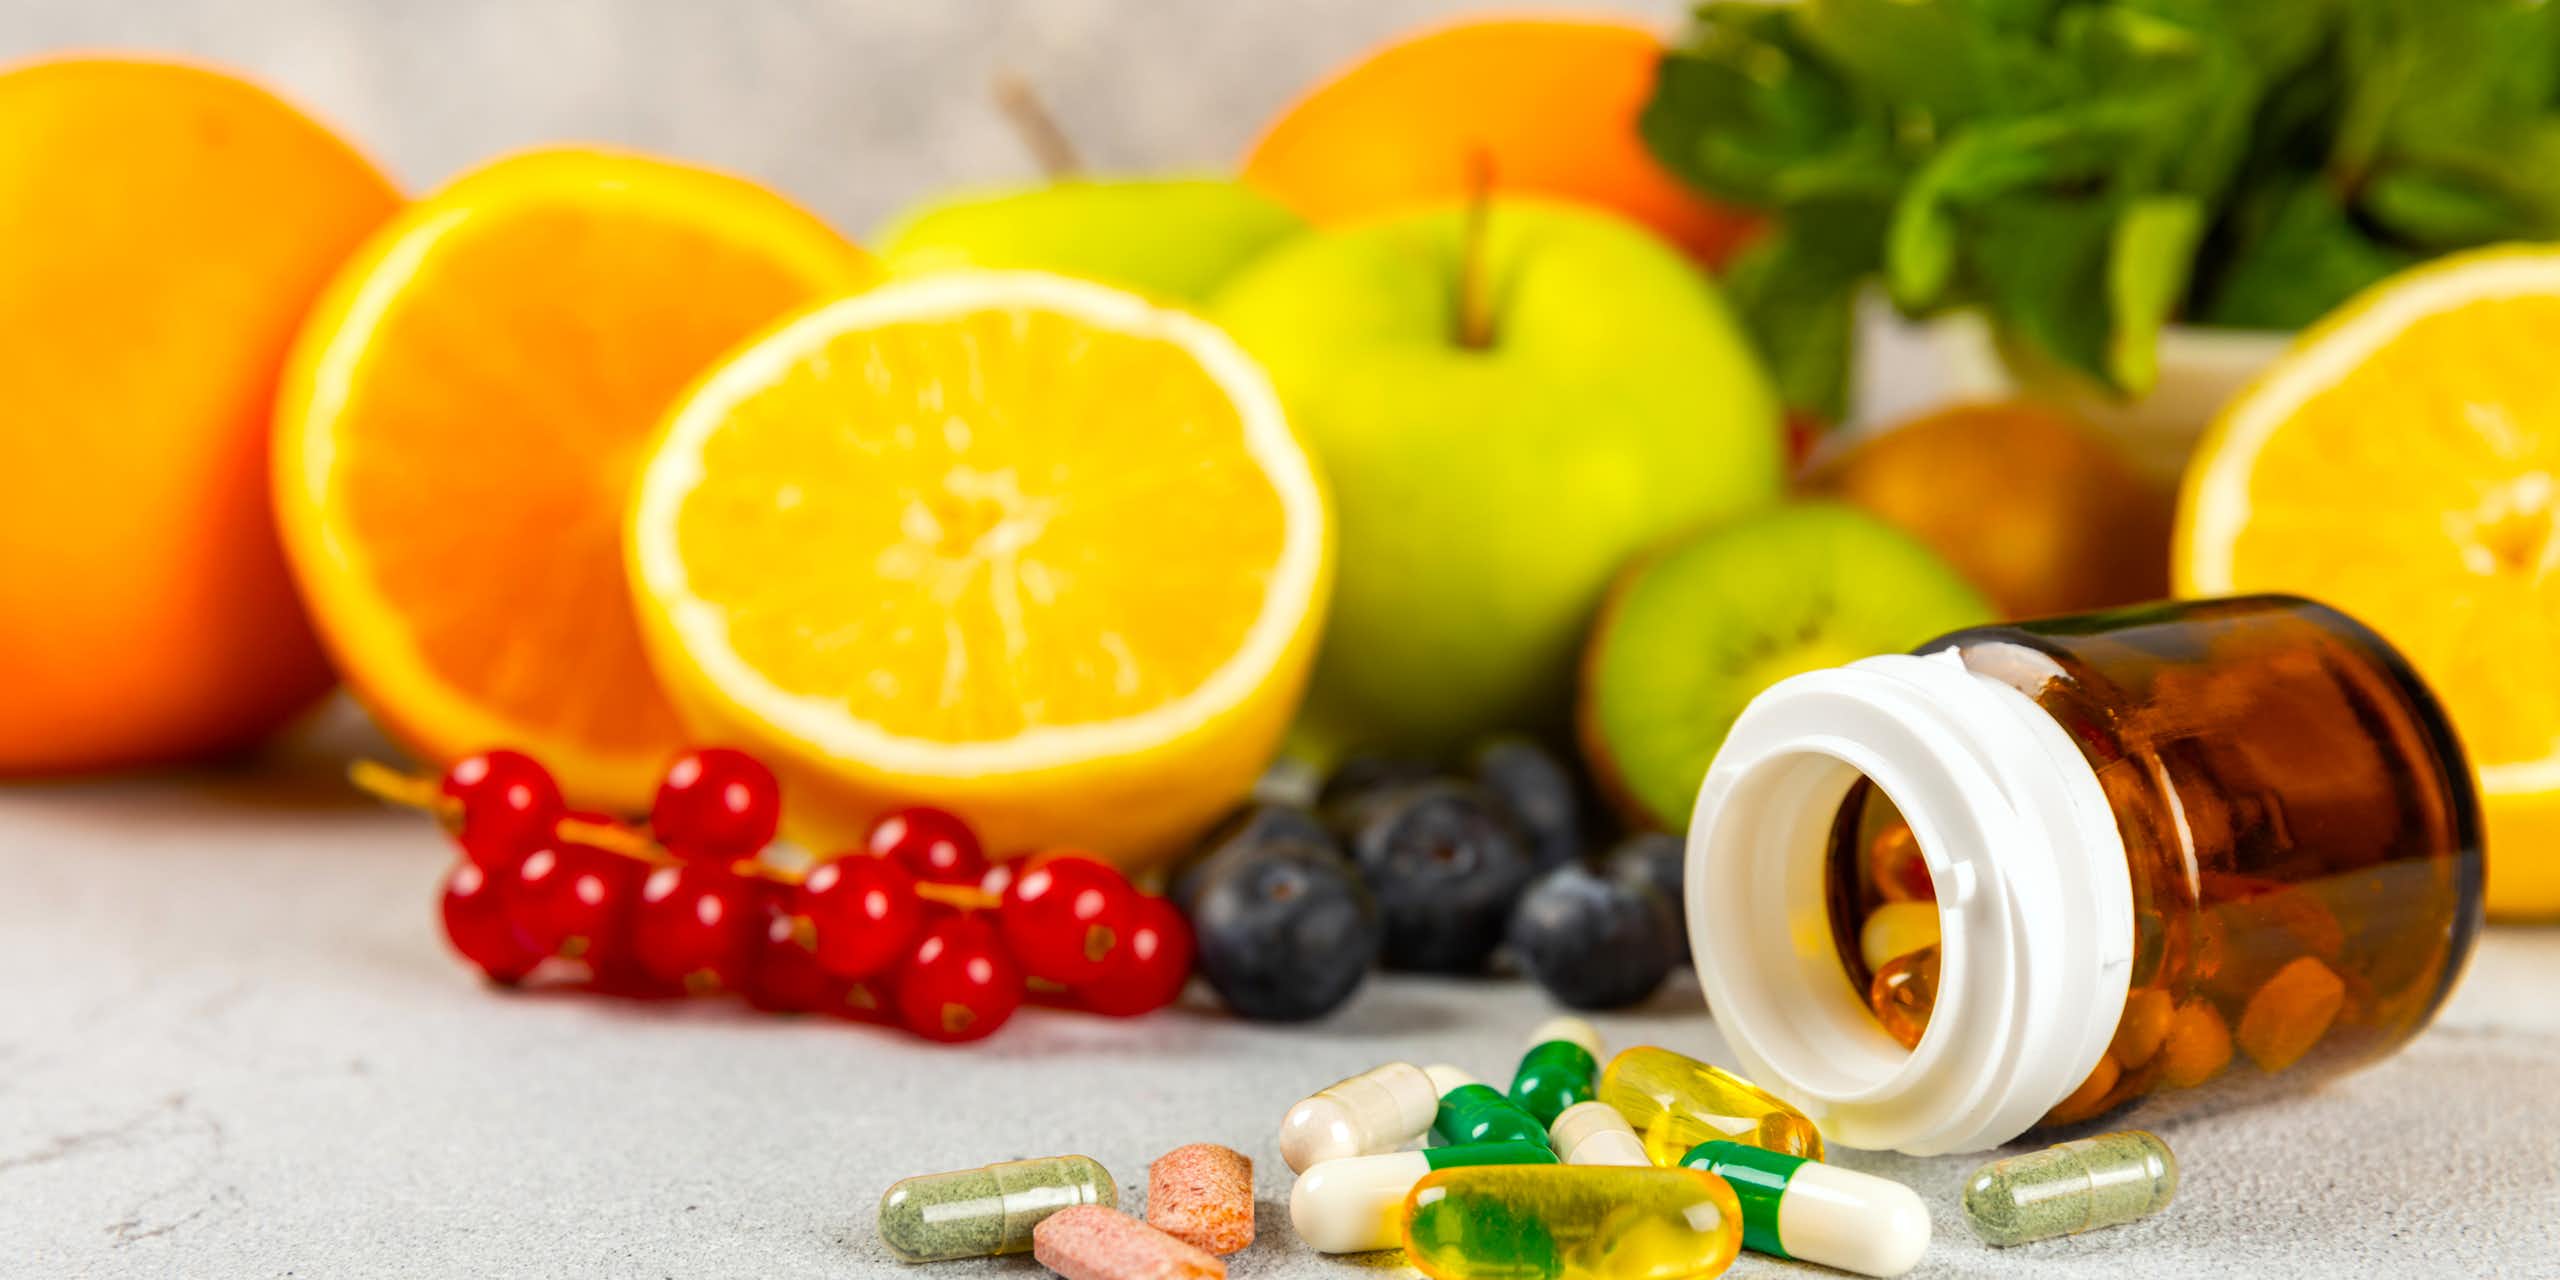 Vitamin supplements with fruit and vegetables.